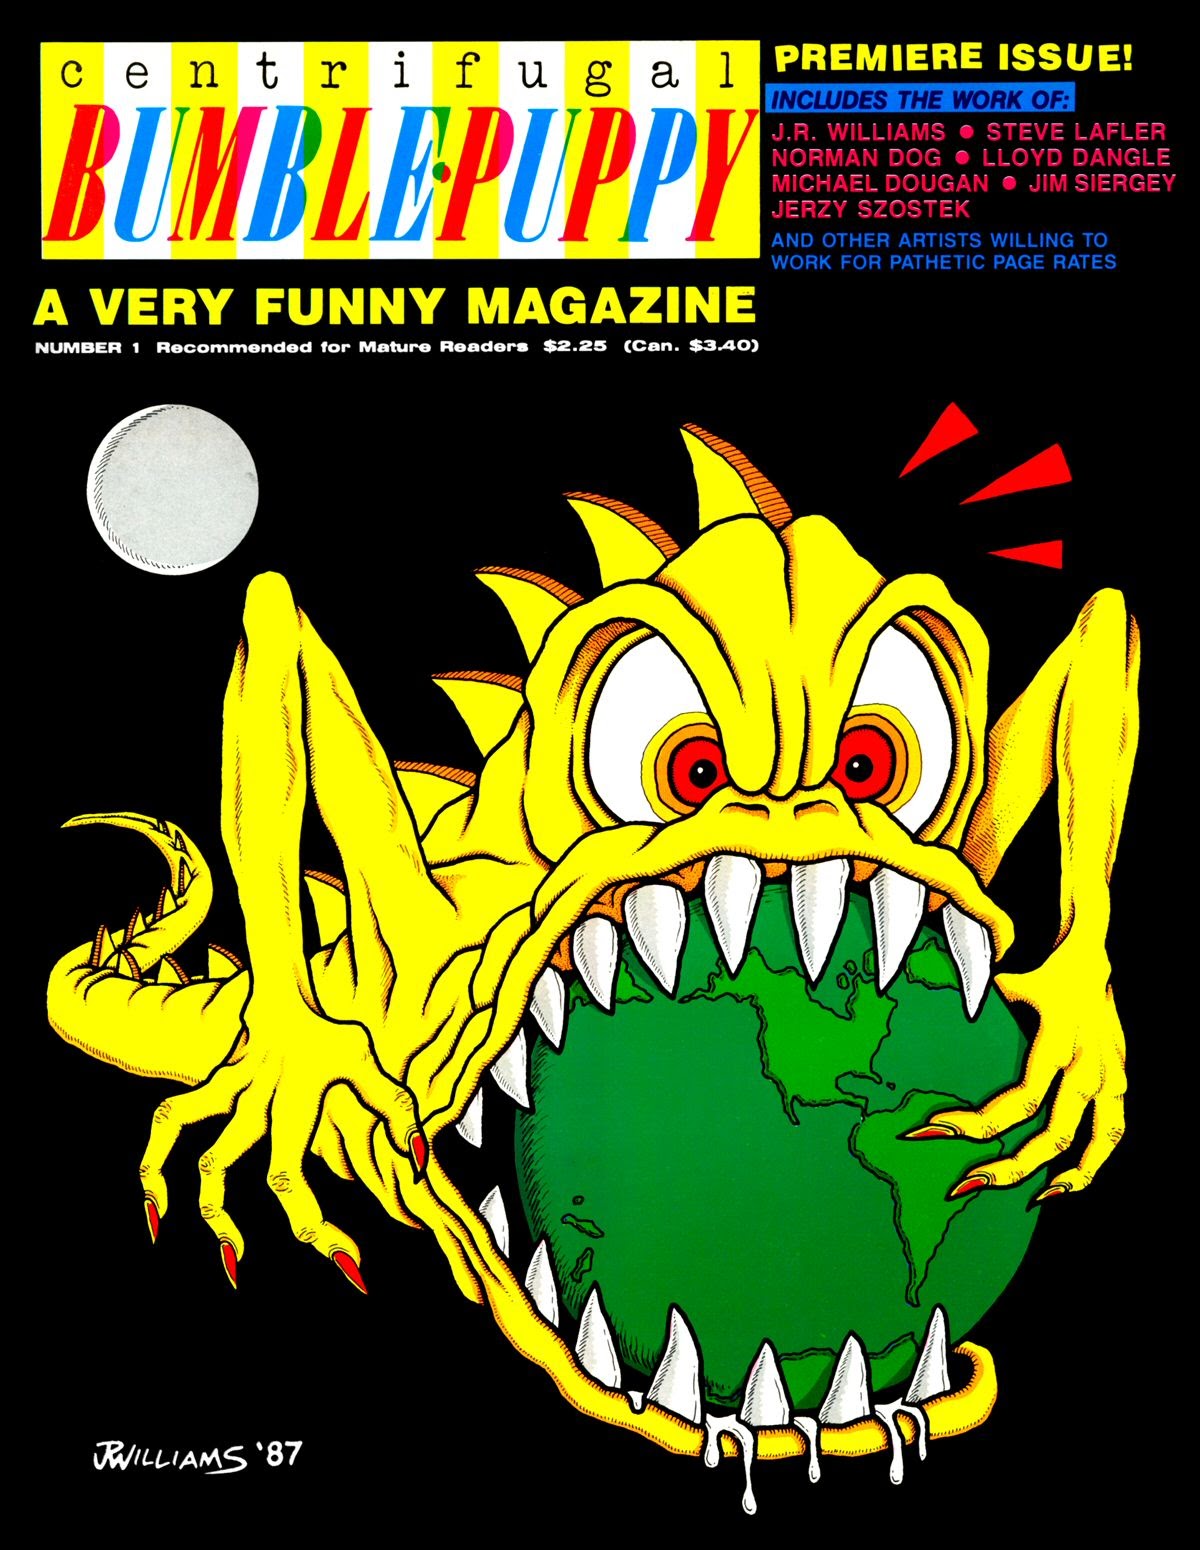 Read online Centrifugal Bumble-Puppy comic -  Issue #1 - 1